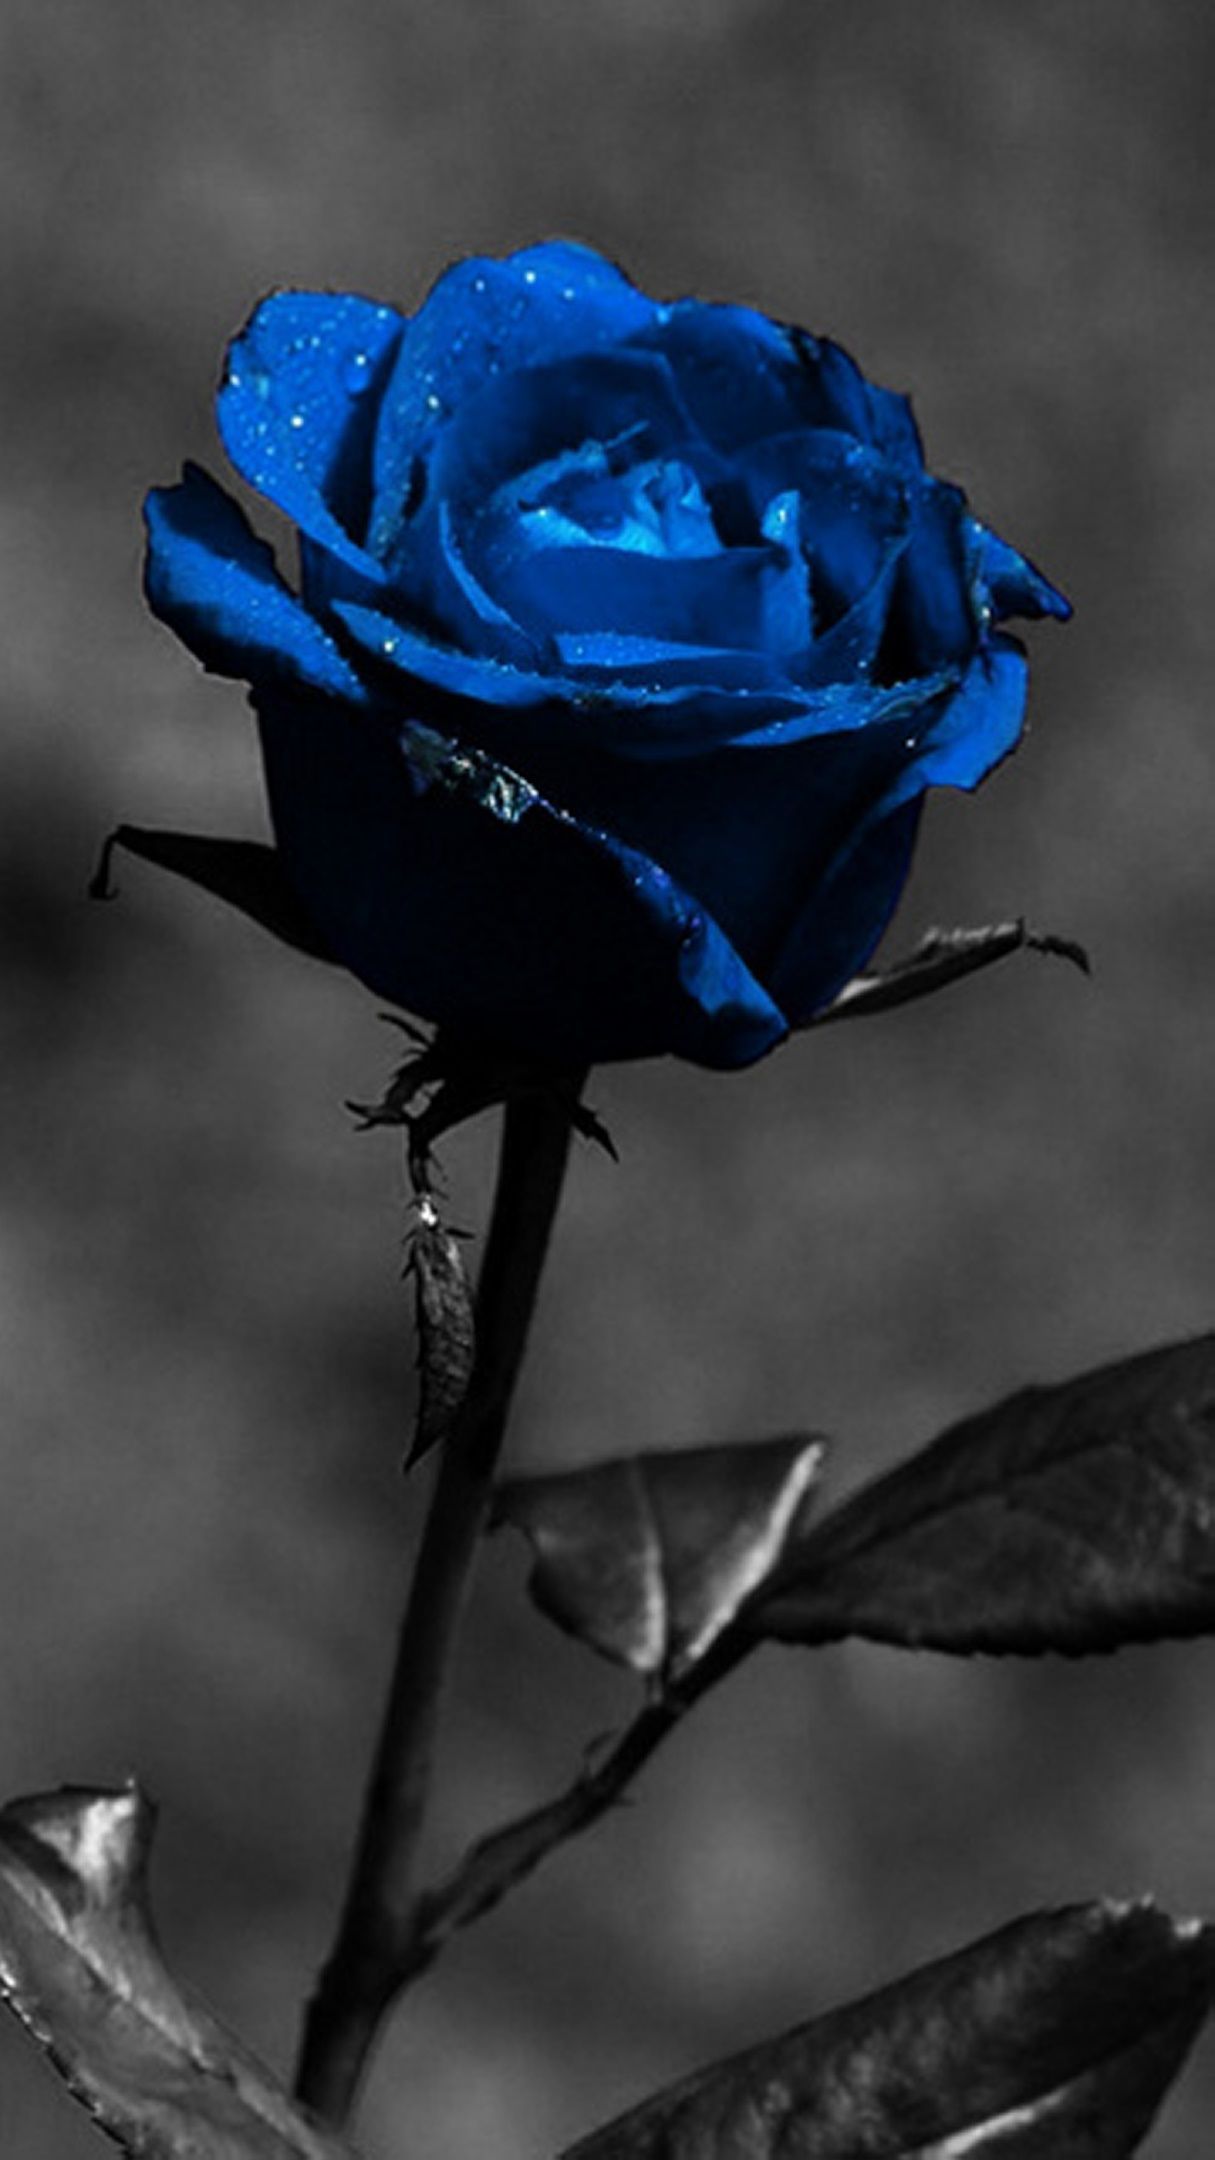 Wallpaper Hd Black And Blue Rose